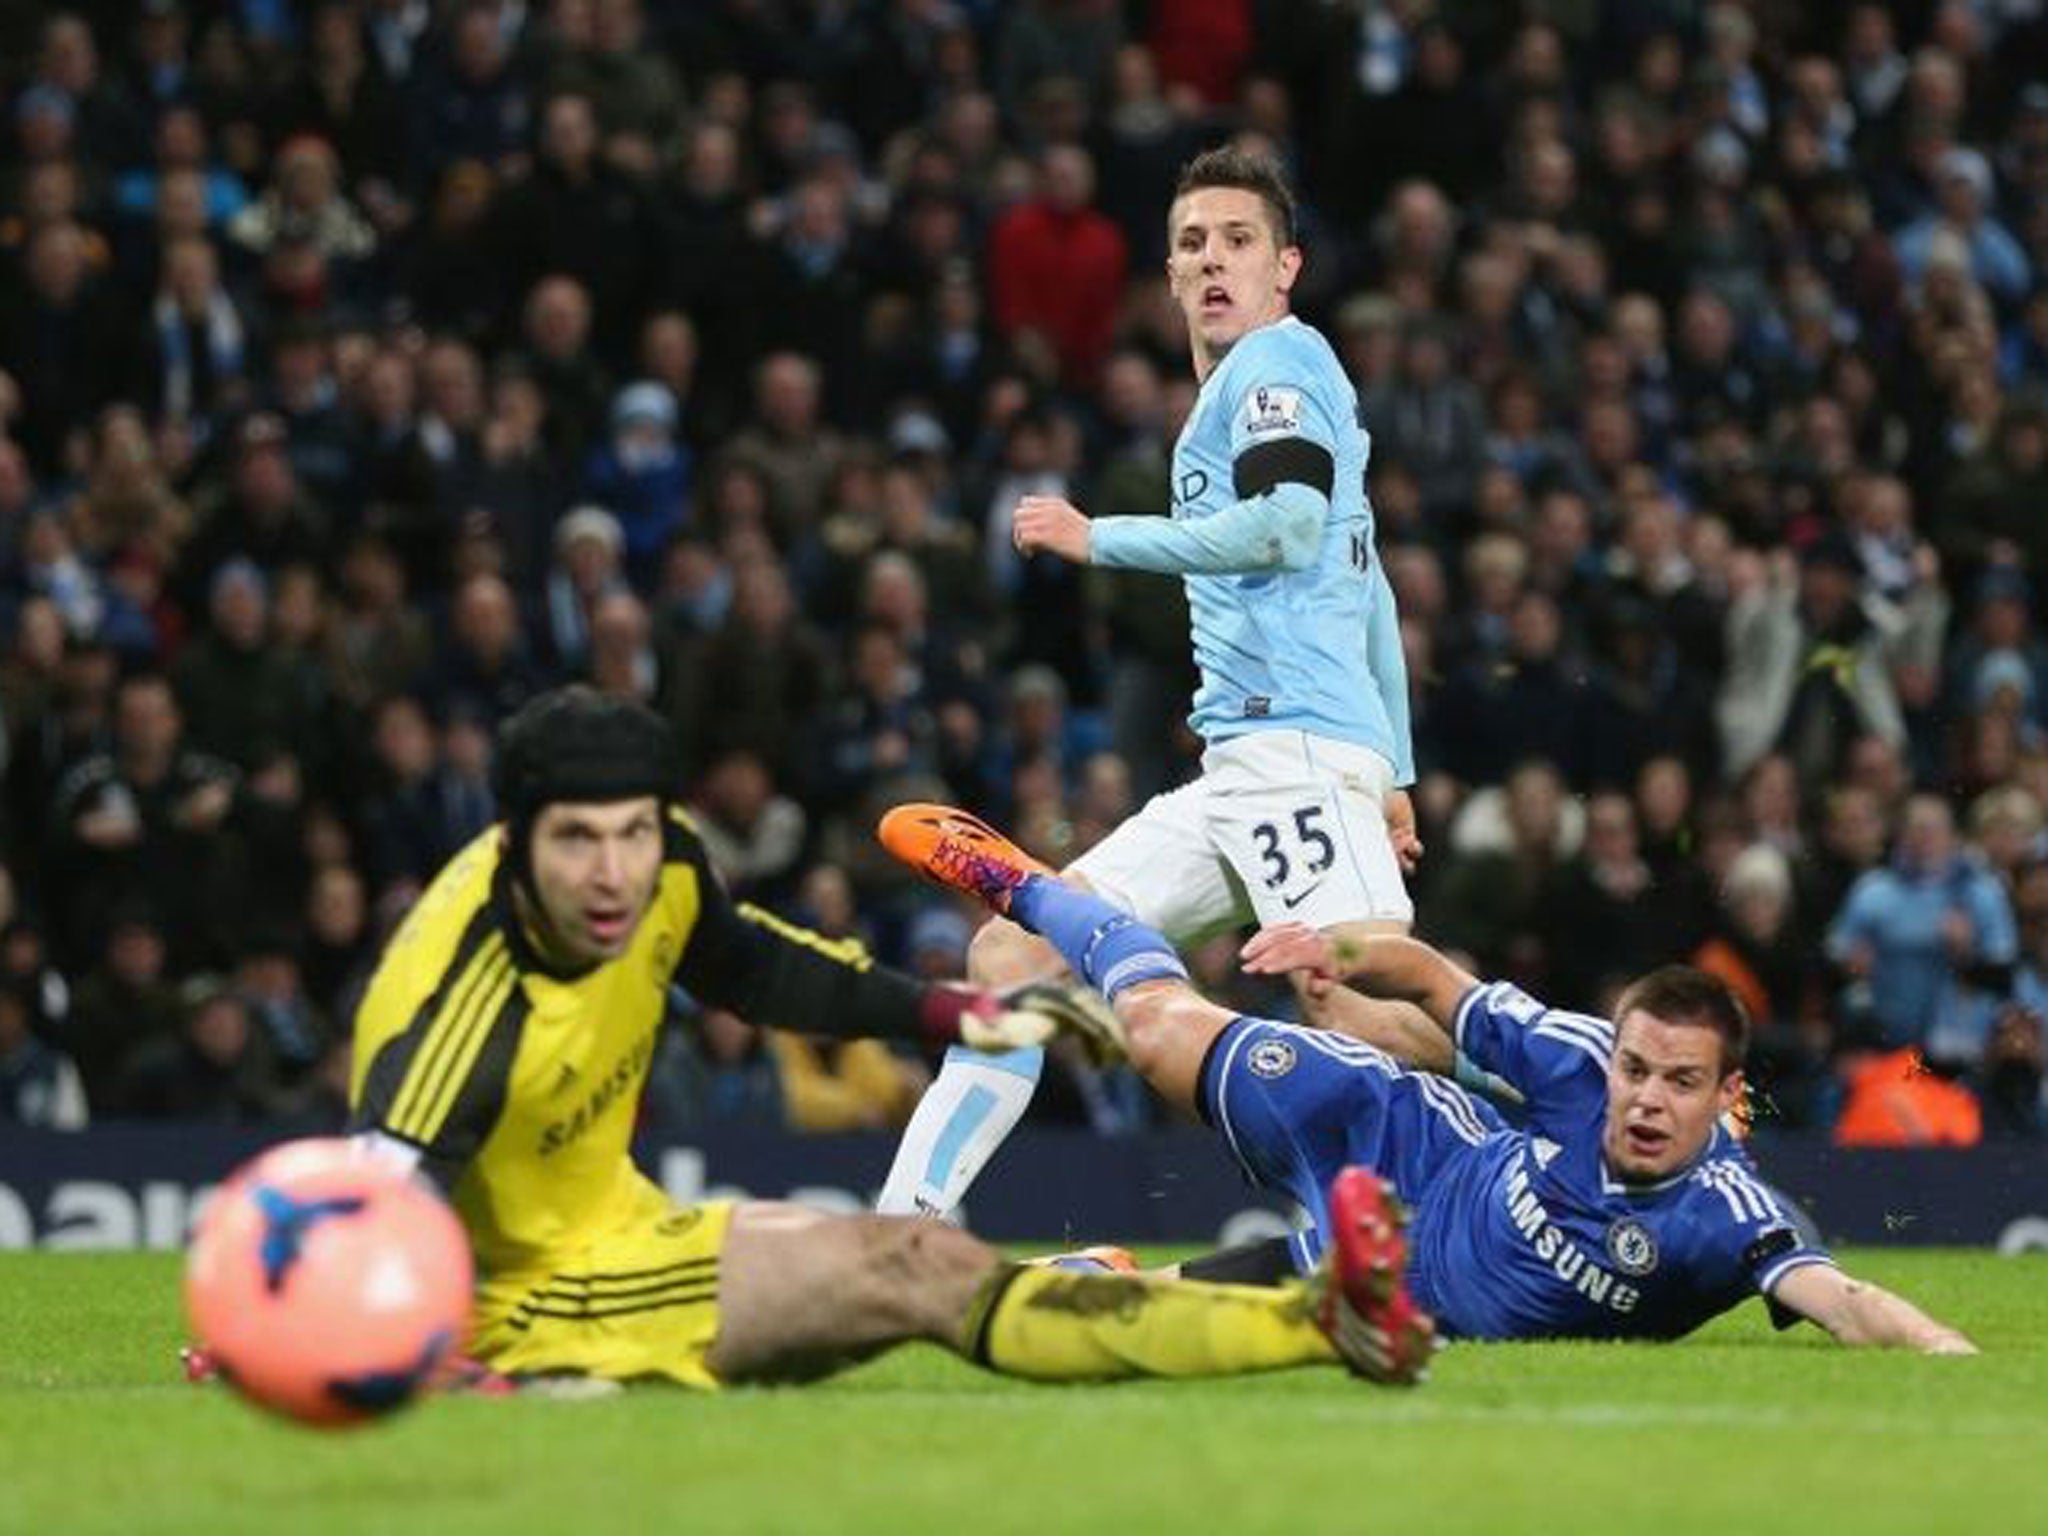 Watchmen: Stevan Jovetic looks on as he scores Manchester City’s opening goal past Chelsea’s Petr Cech (left) and Nemanja Matic (right) during yesterday’s FA Cup tie